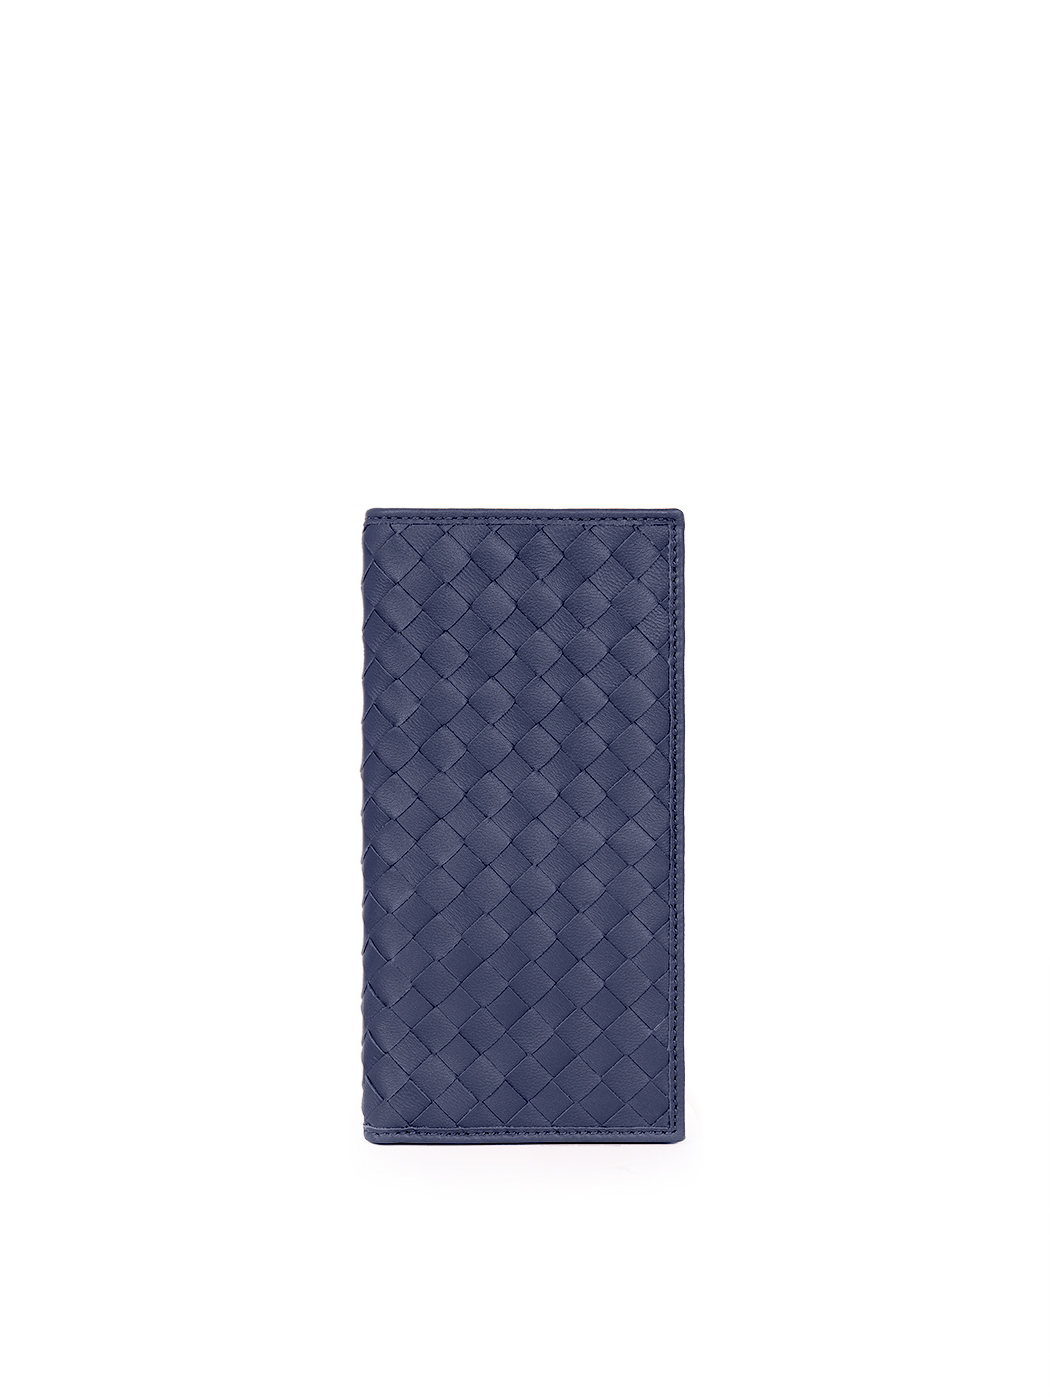 Long wallet with card holder in blue woven leather